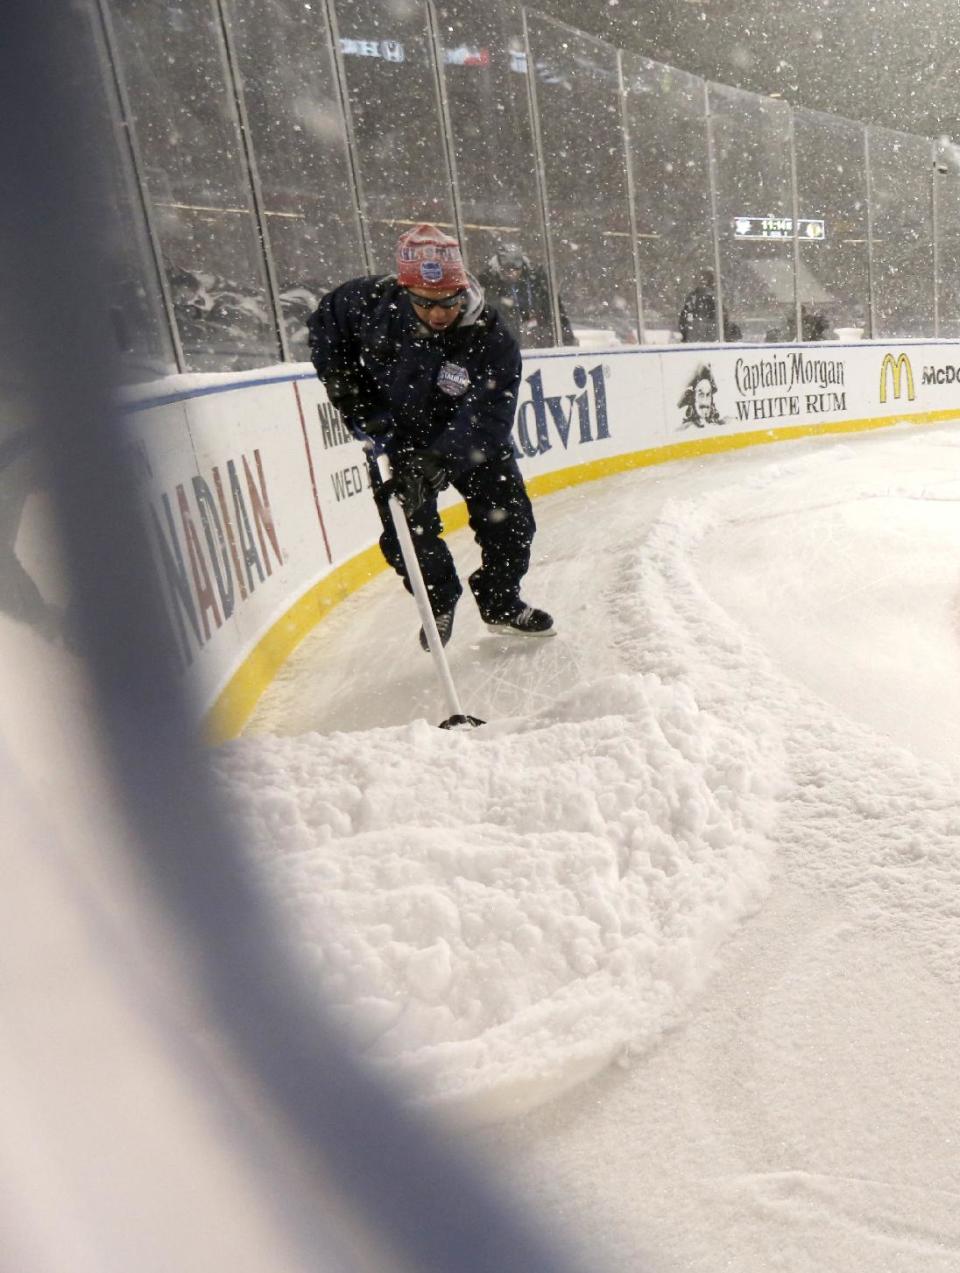 A members of the ice crew removes accumulative snow from the ice during the first period of an NHL Stadium Series hockey game between the Chicago Blackhawks and the Pittsburgh Penguins at Soldier Field on Saturday, March 1, 2014, in Chicago. (AP Photo/Charles Rex Arbogast)